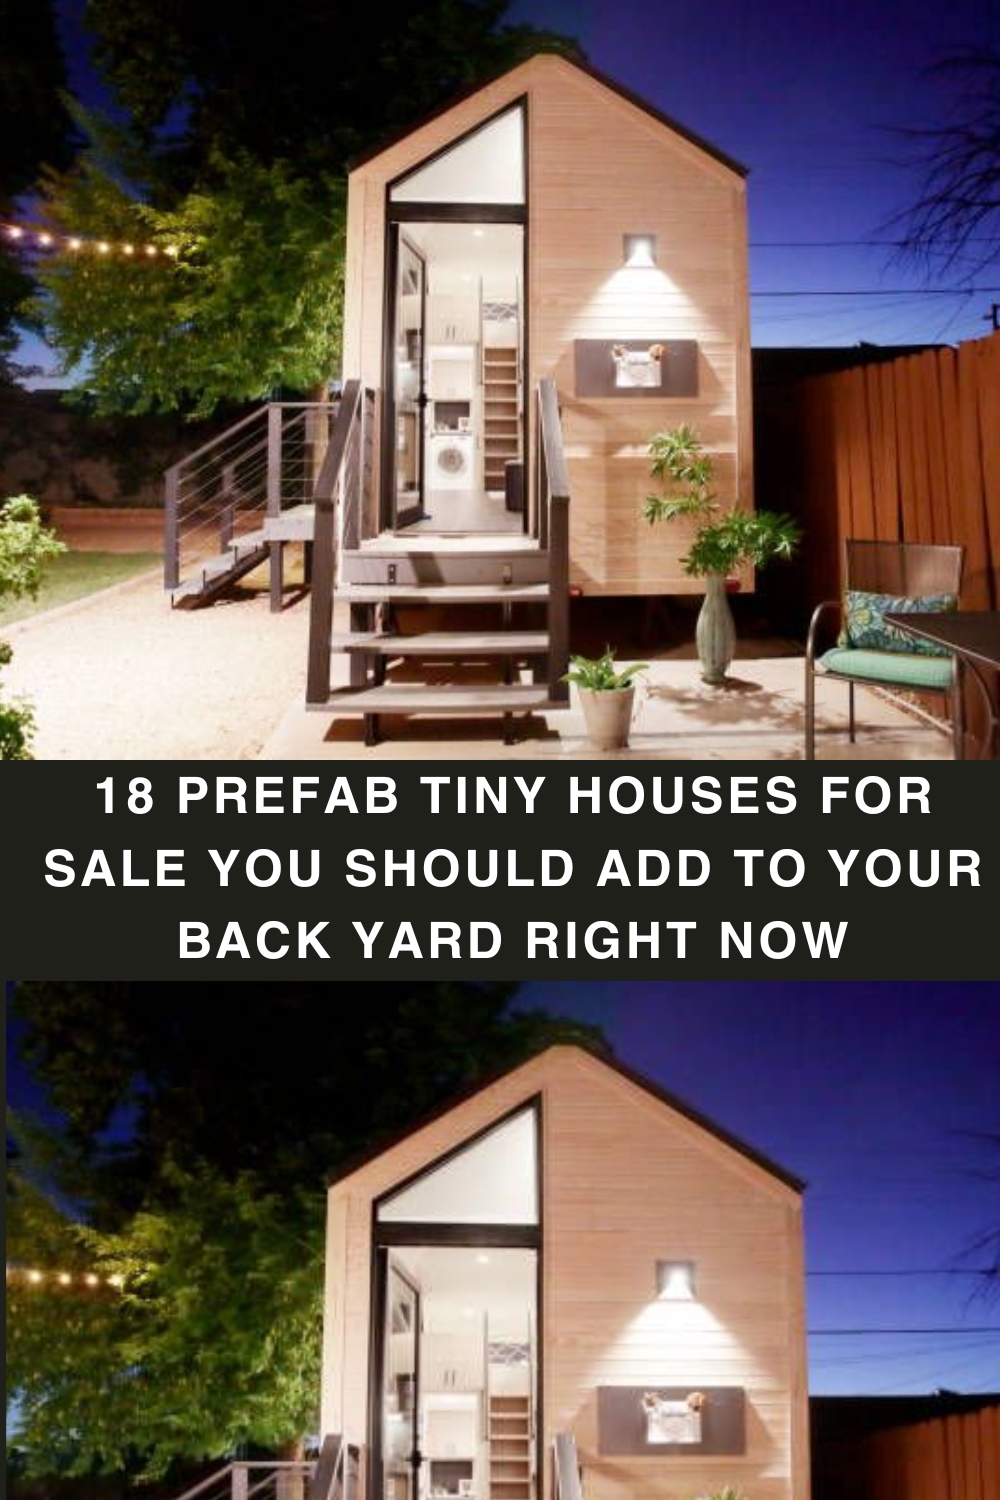 18 Prefab Tiny Houses for Sale You Should Add to Your Back Yard Right Now